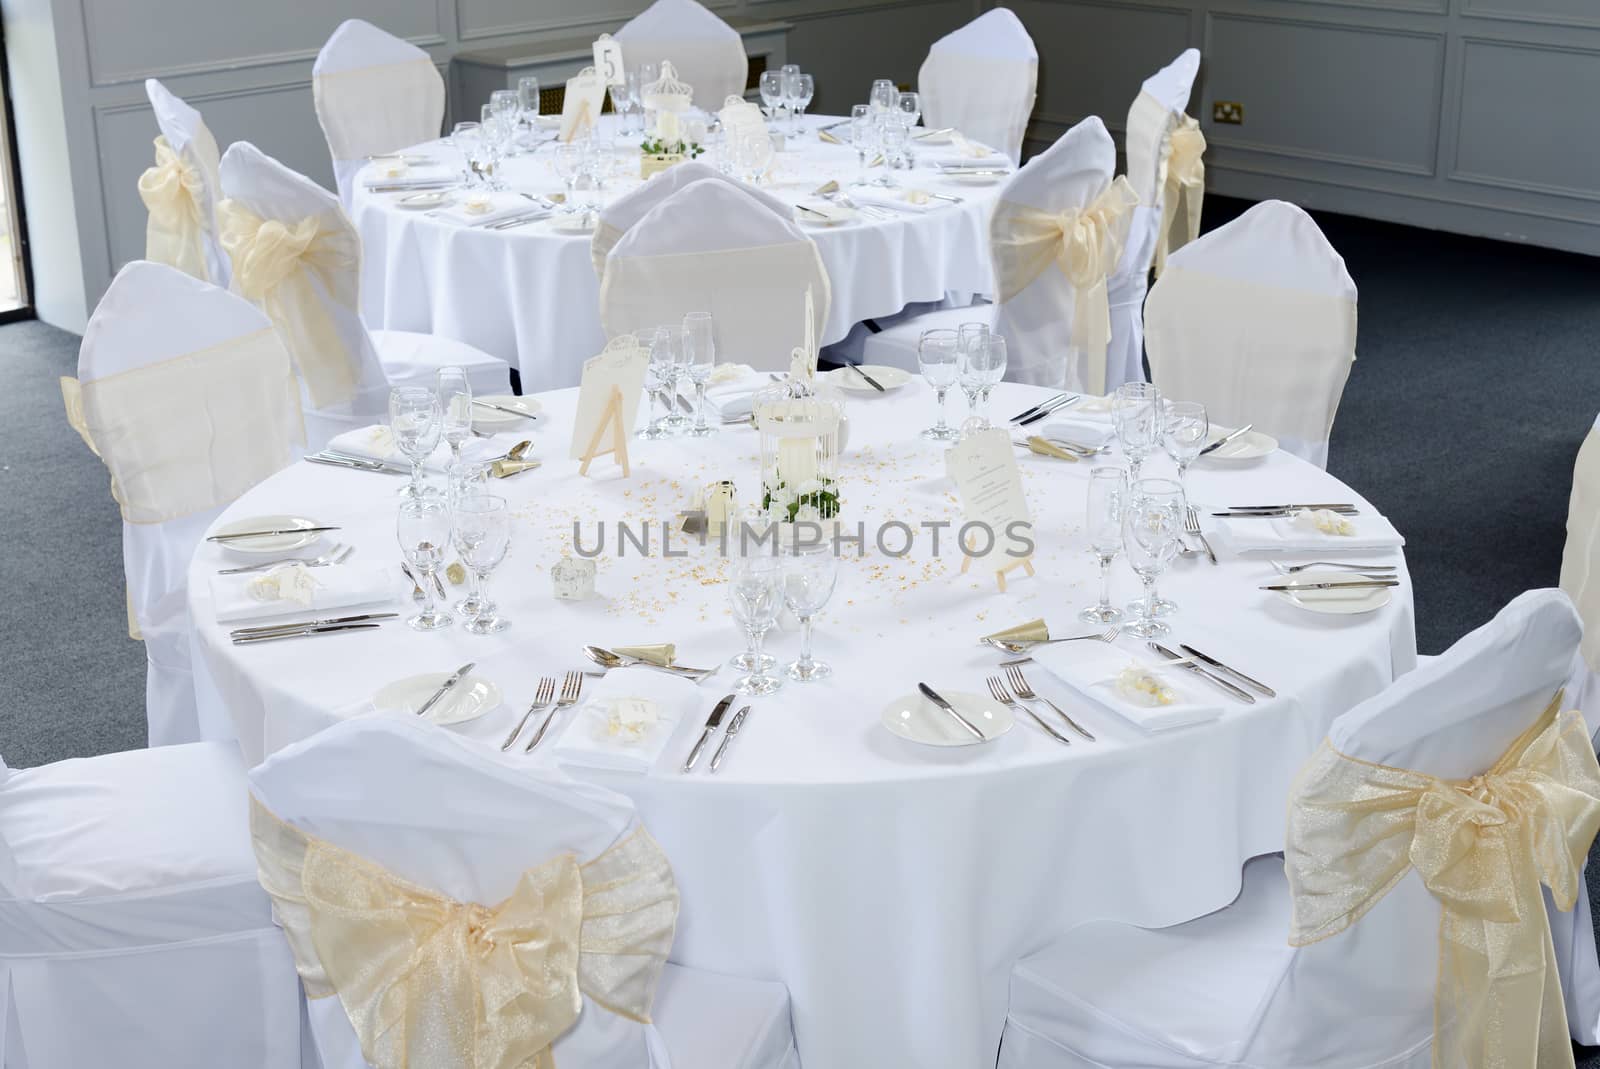 Wedding reception table with ornate decorations